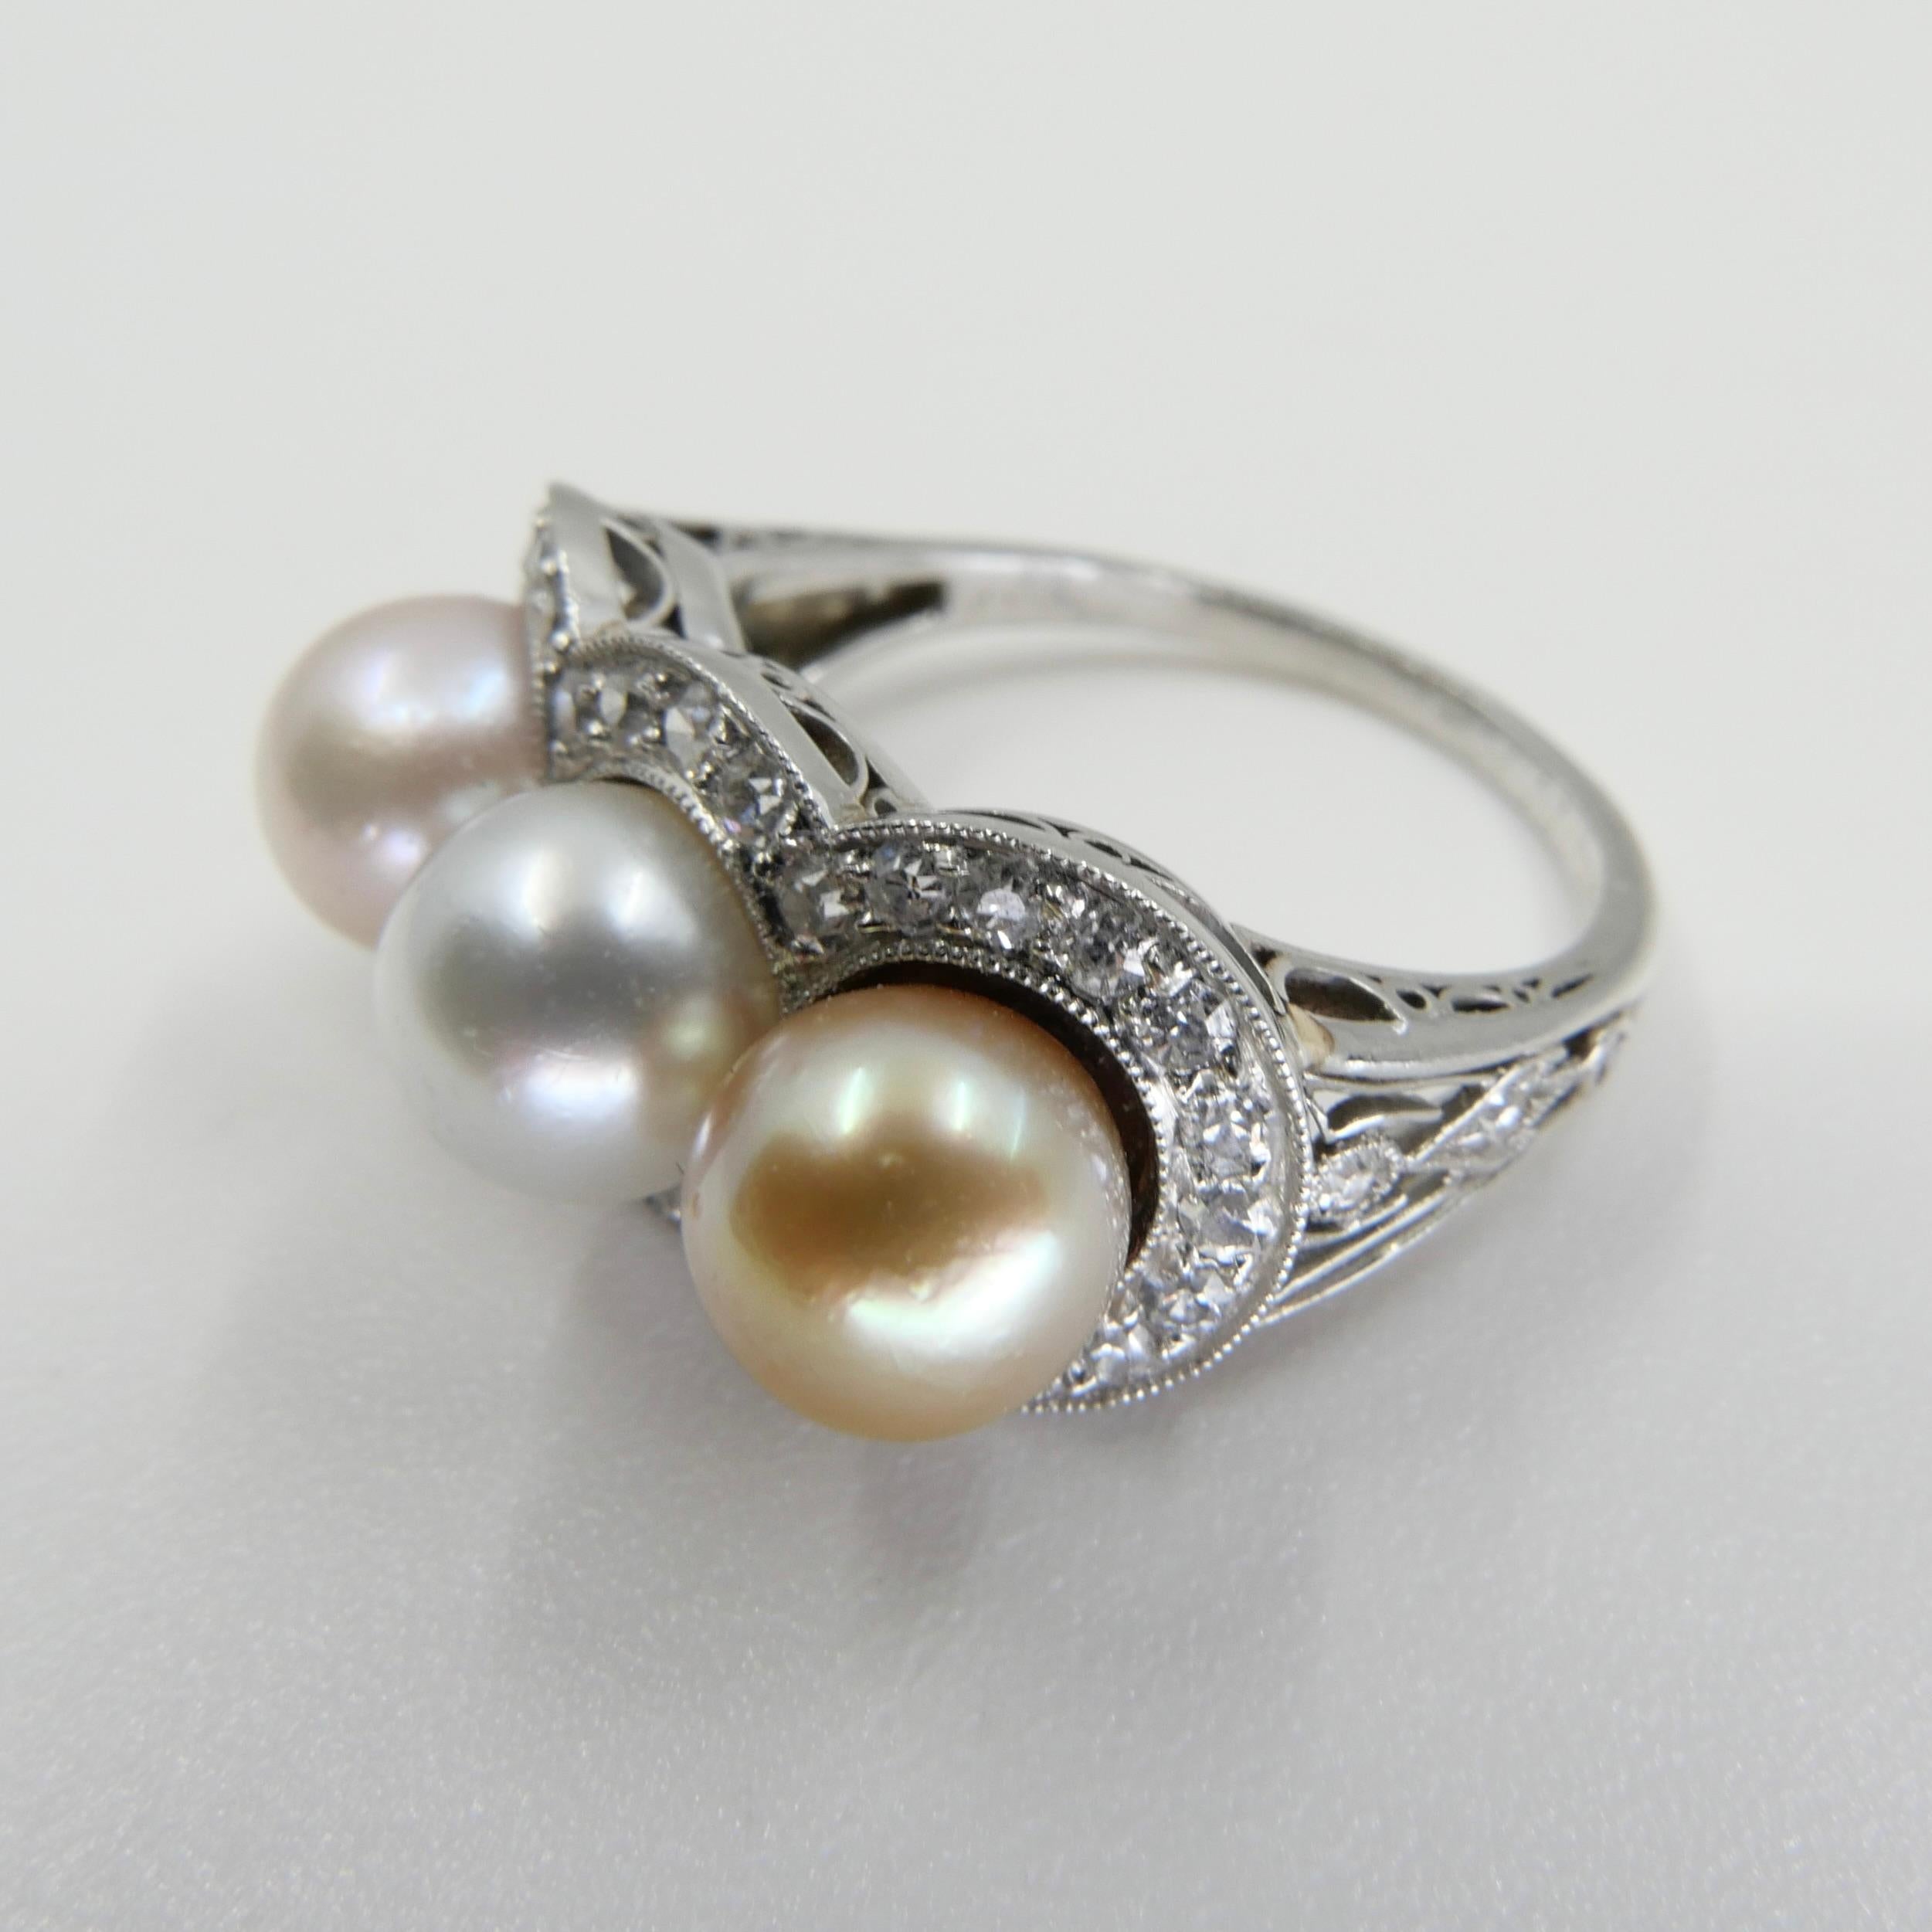 J E Caldwell Belle Epoque Certified 3 Natural Colored Pearls and Diamond Ring 4